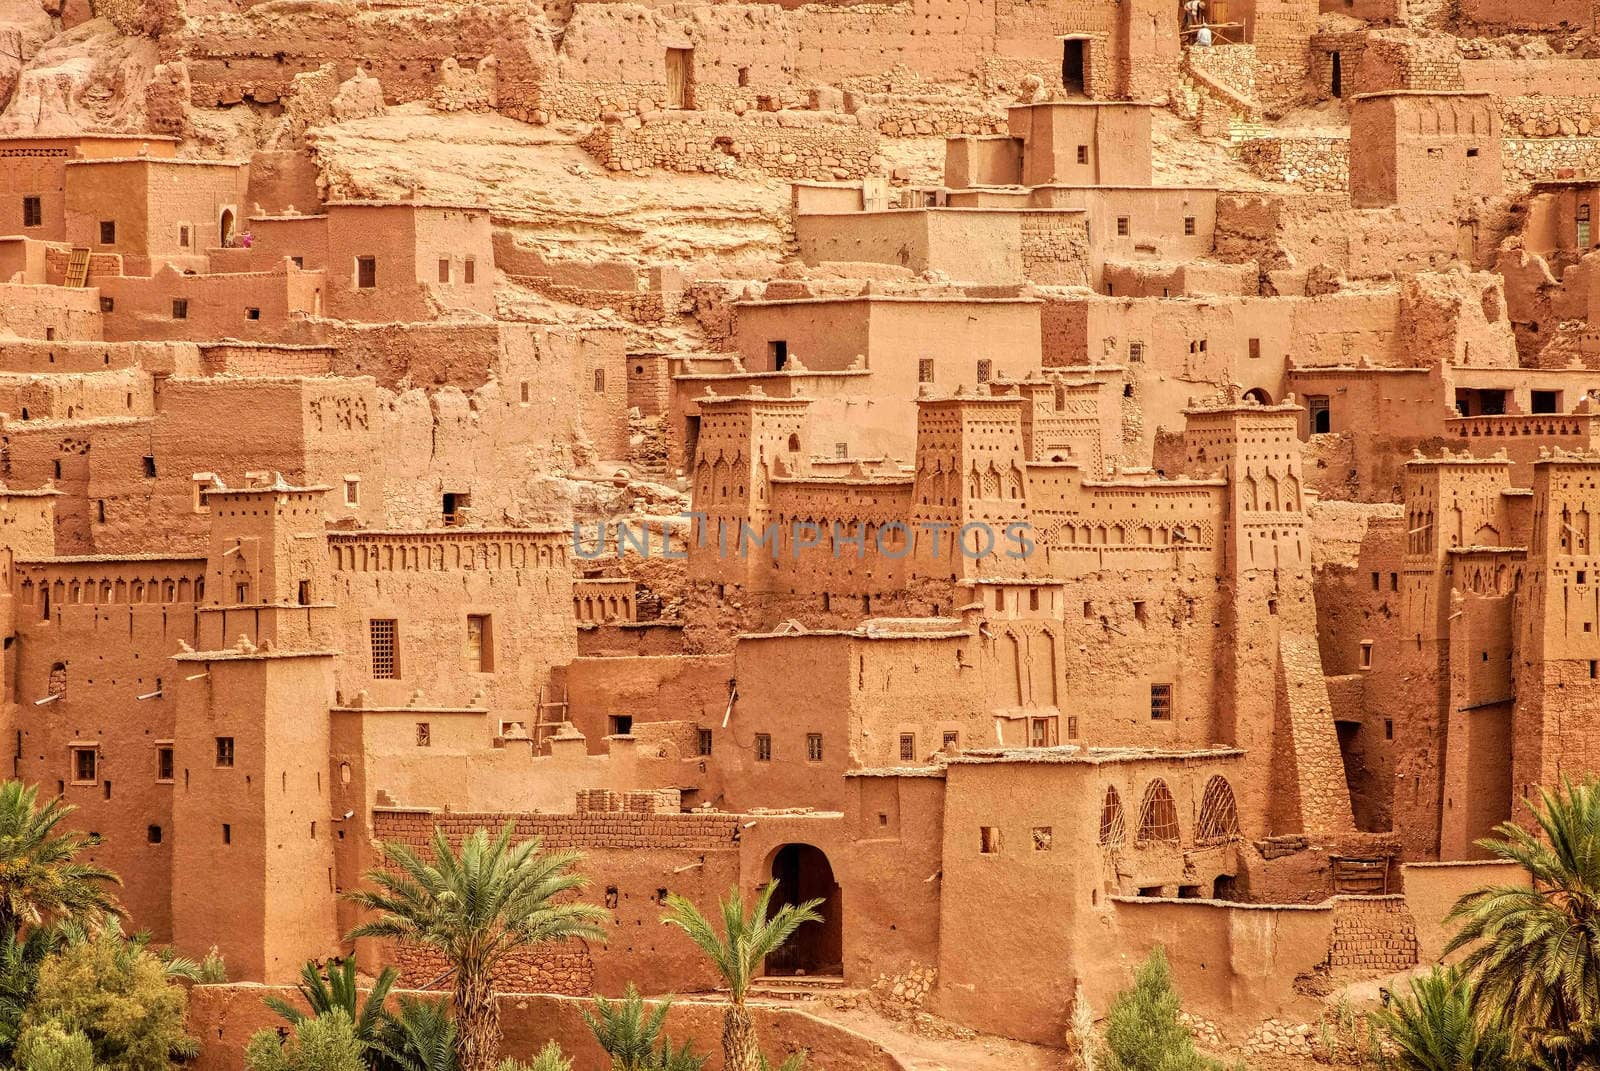 Detailed view of the clay kasbah Ait Benhaddou in Morocco